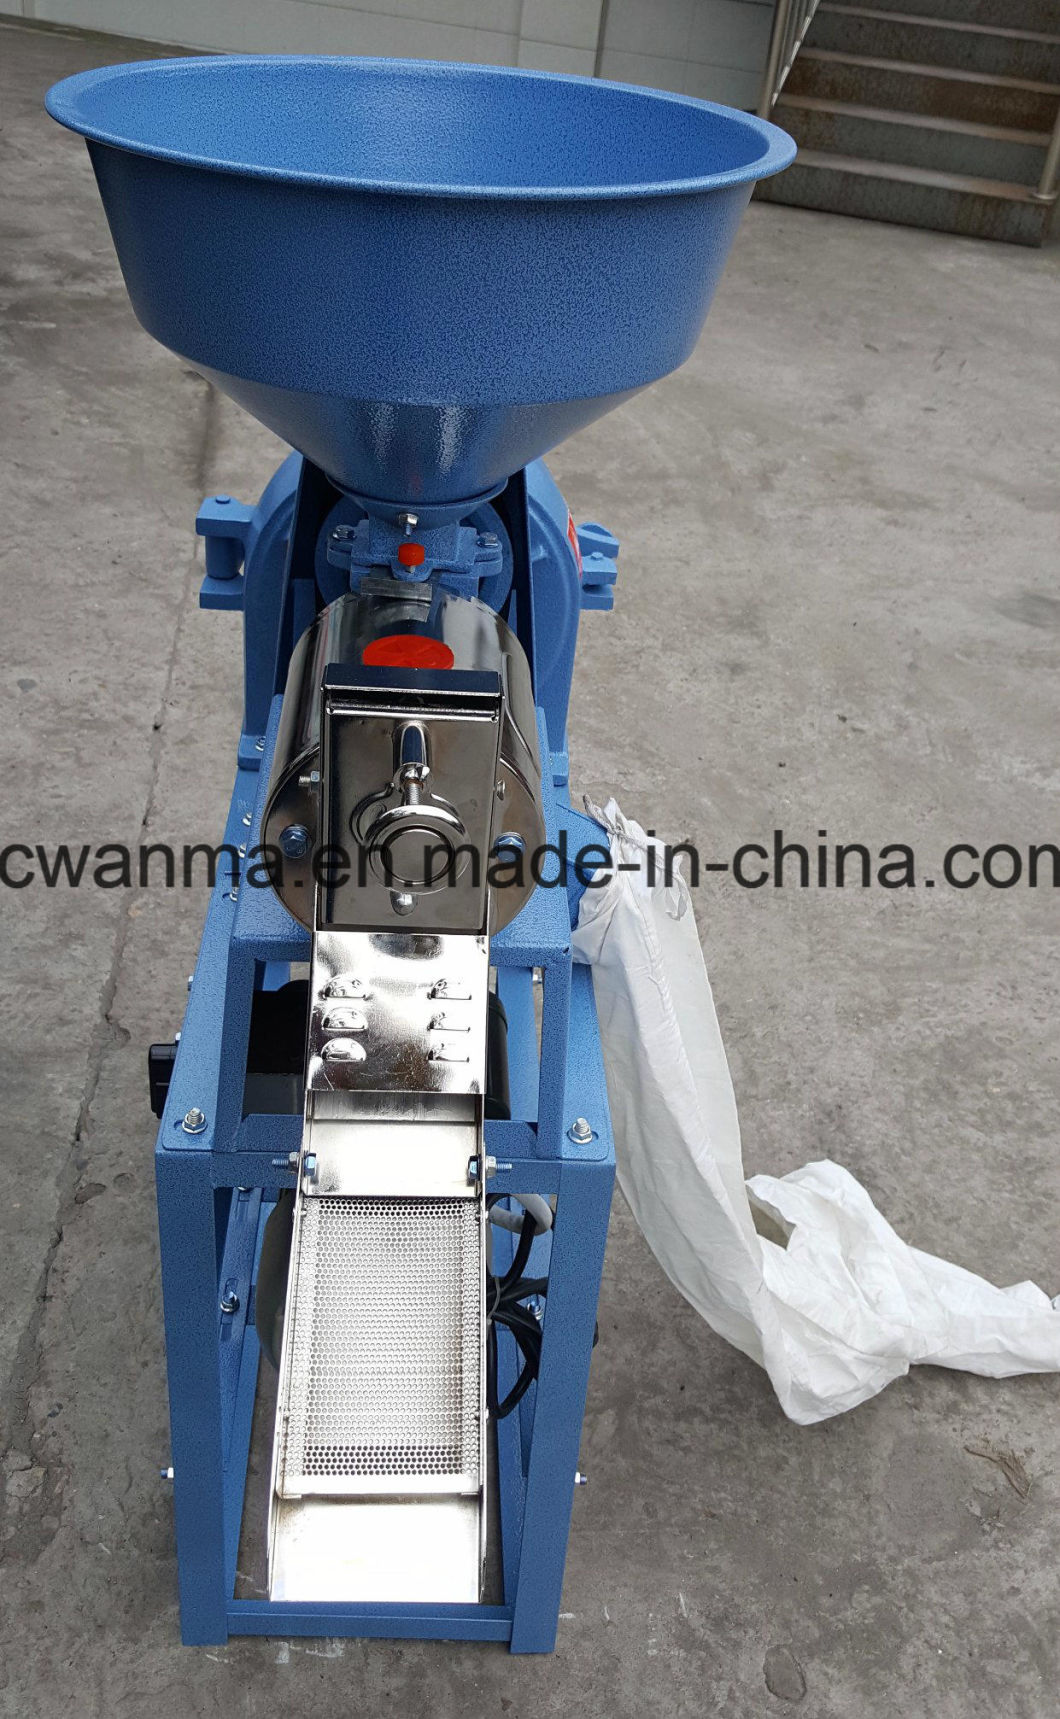 Wanma87 High Rate Grain Milling Equipment Rice Milling Machinery for Sale